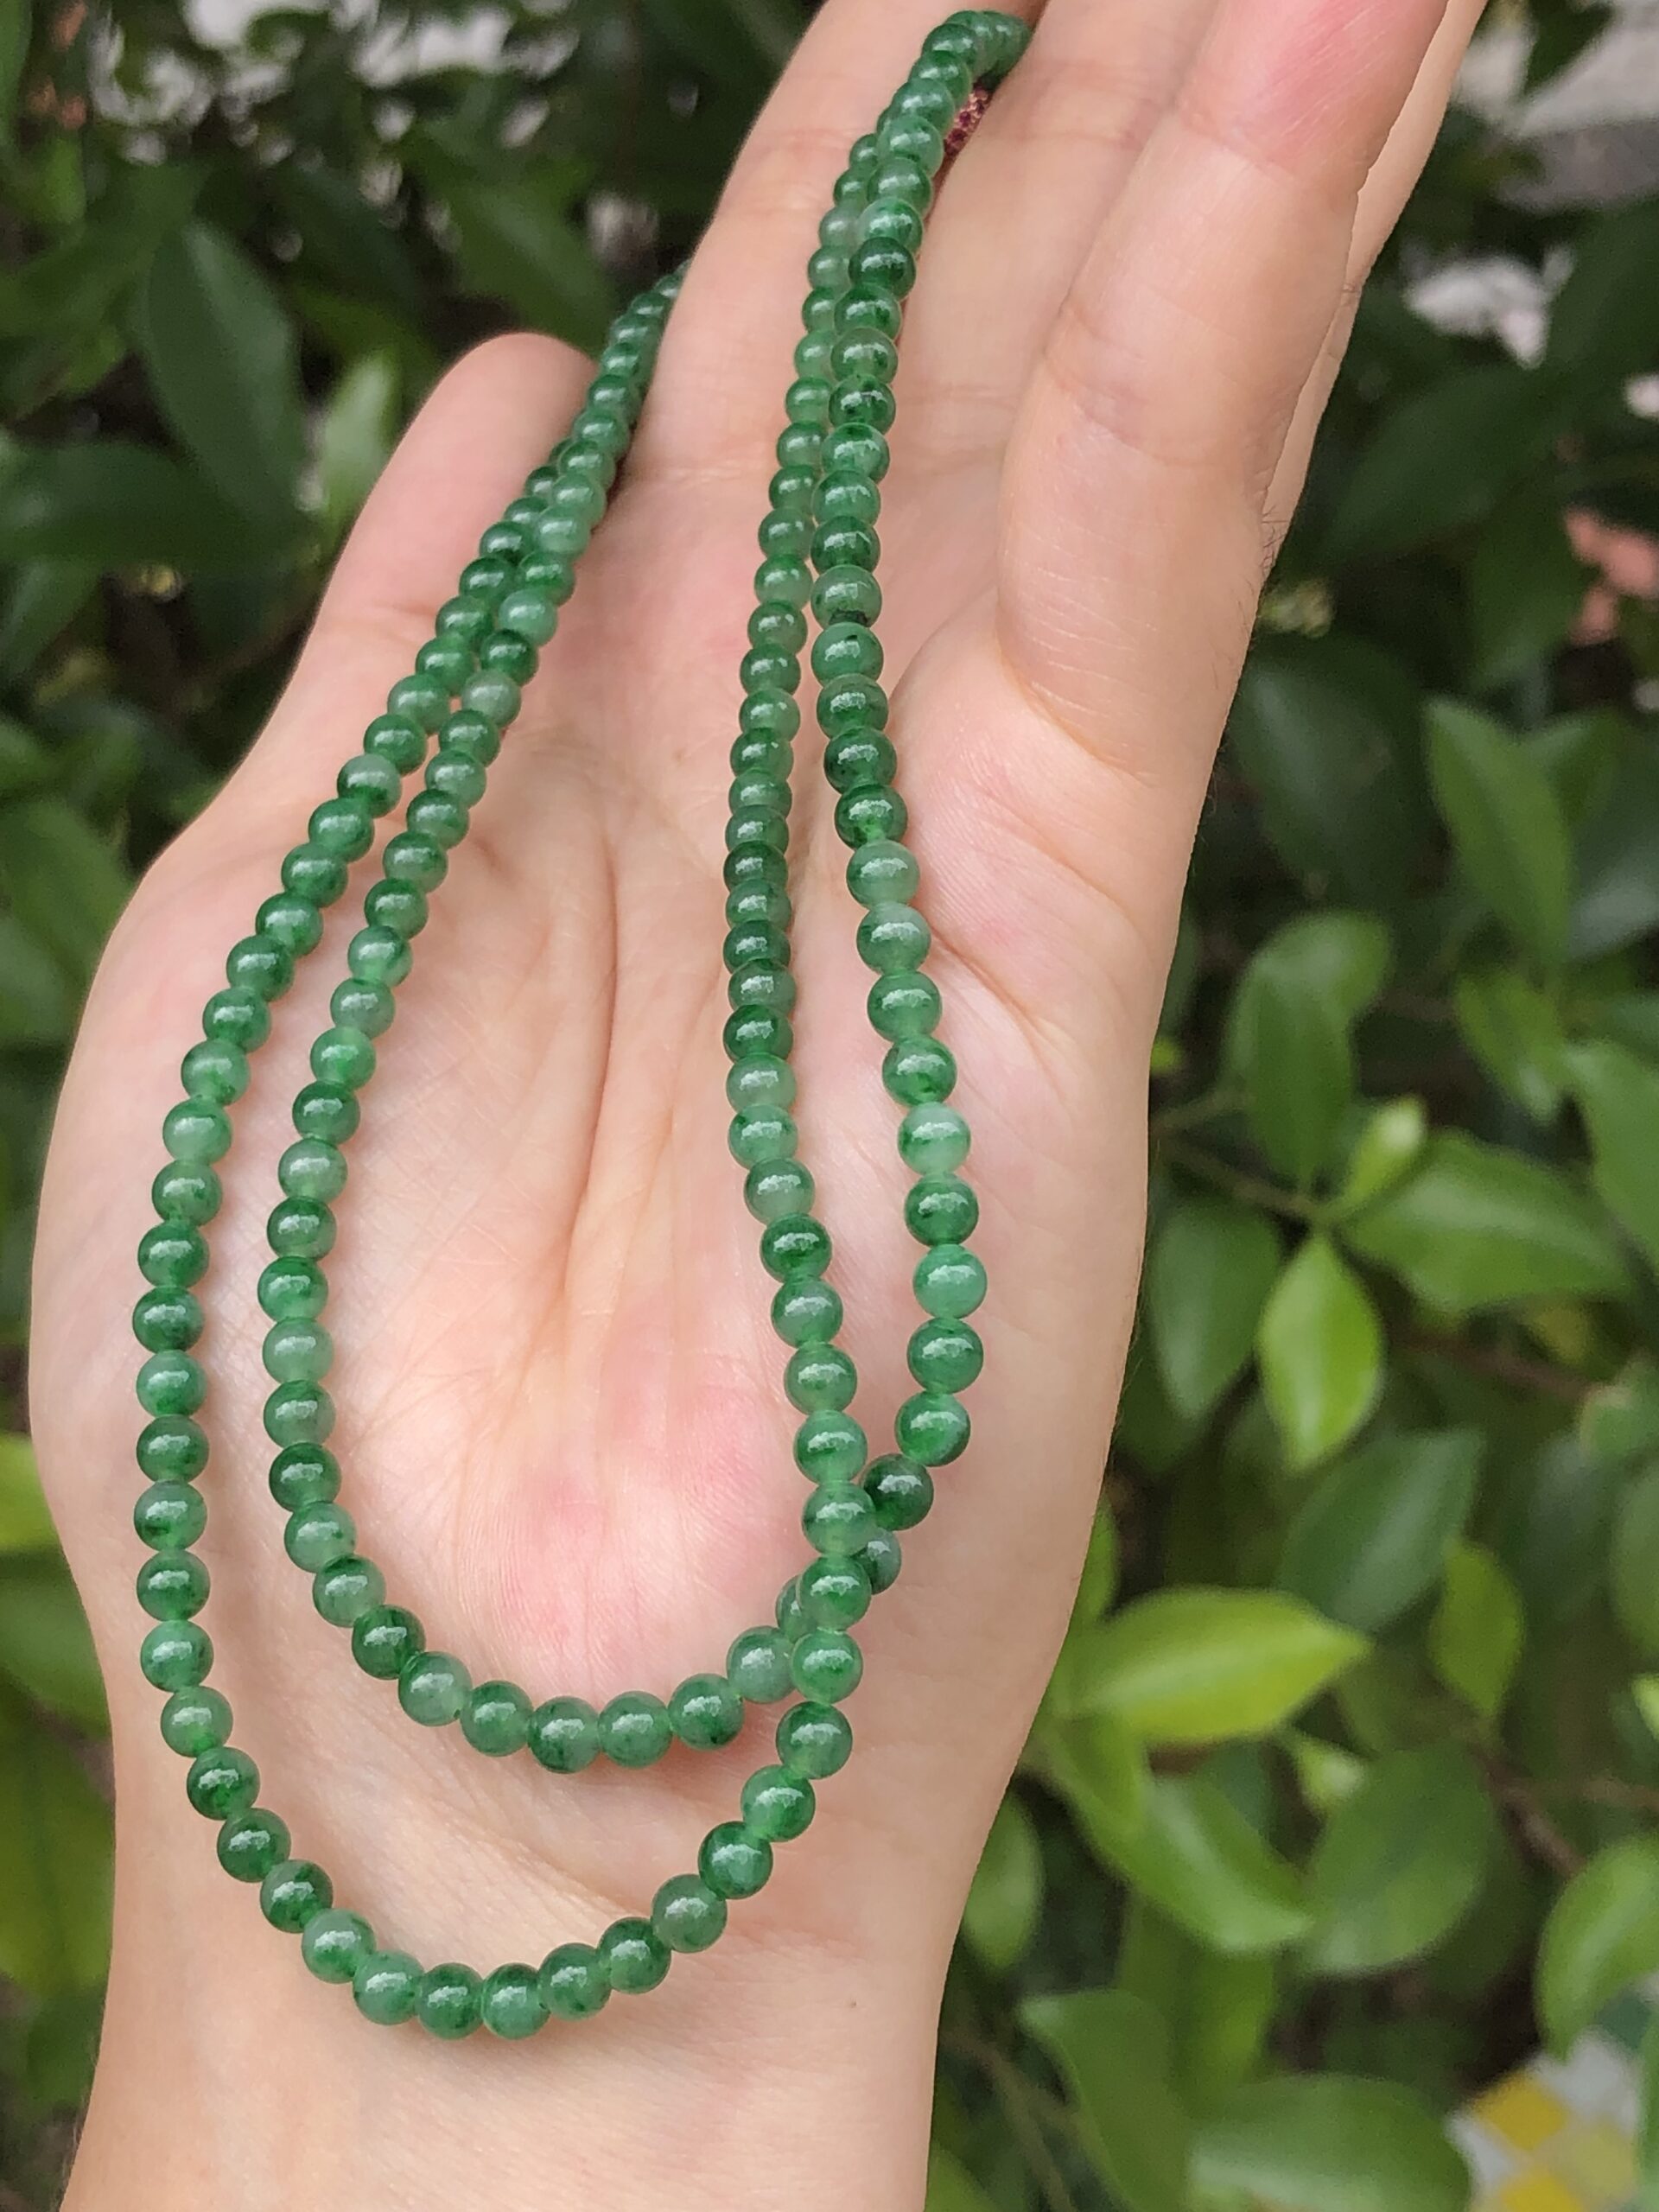 9x10mm Genuine Natural Hetian Jade Necklace Pendant beads,Gemstone  Pendant,Gemstone Focal beads,Chain Necklace Beads,Barrel Beads – Annies  little things